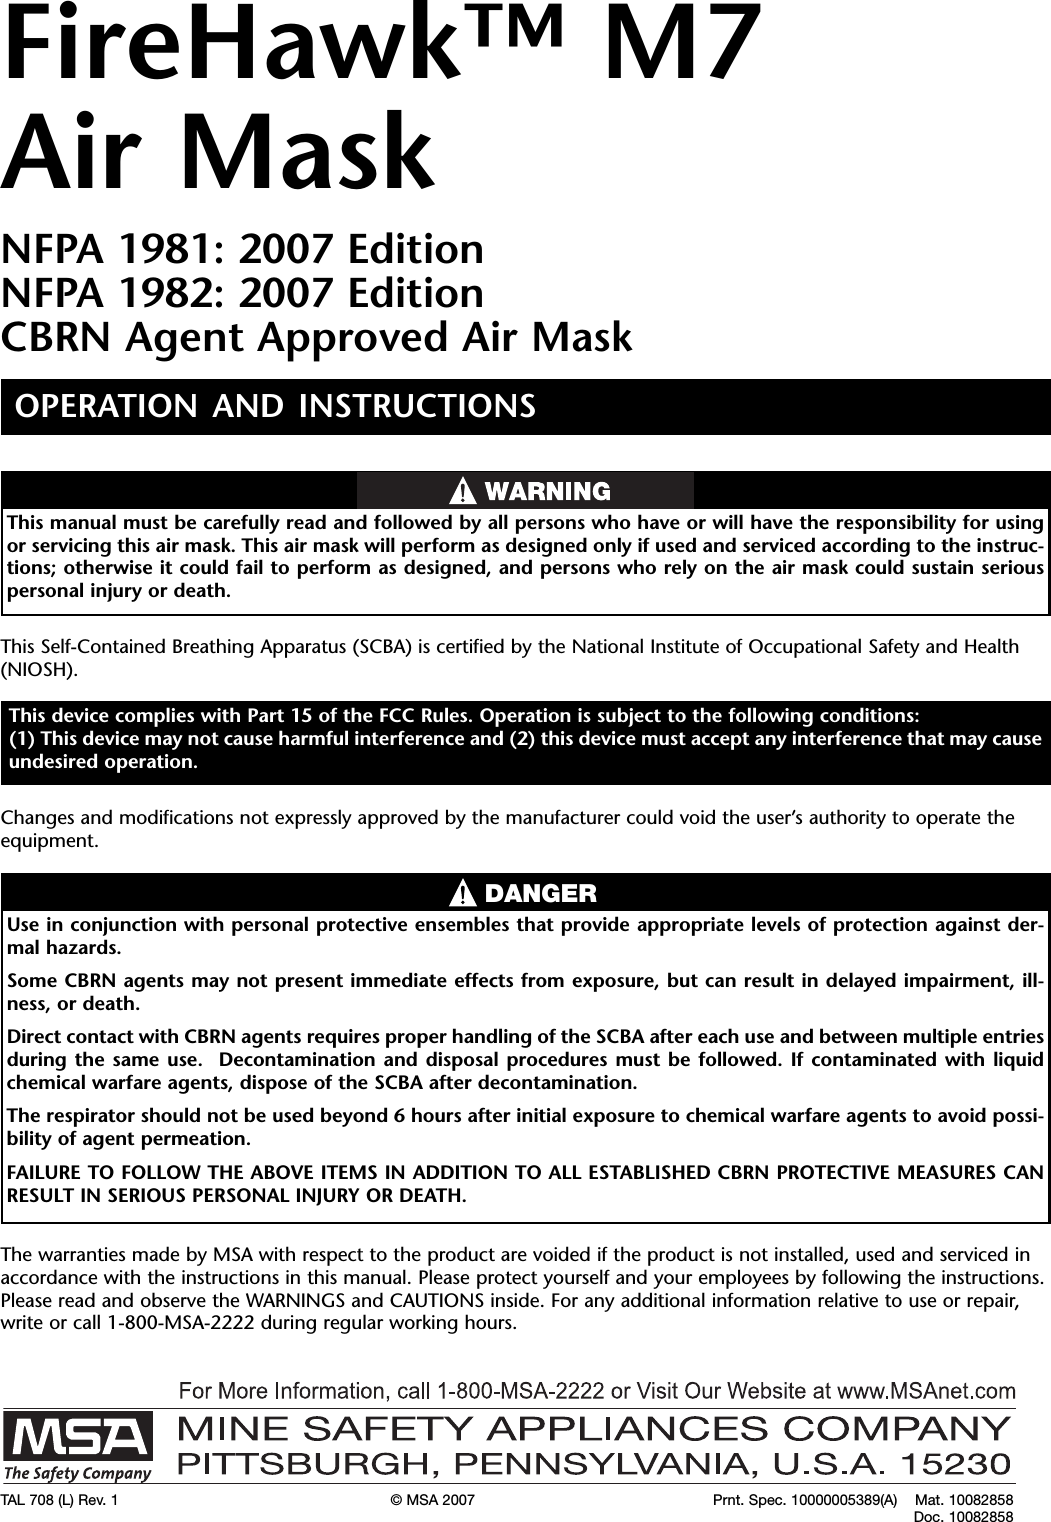 FireHawk™ M7Air MaskNFPA 1981: 2007 EditionNFPA 1982: 2007 EditionCBRN Agent Approved Air MaskOPERATION AND INSTRUCTIONSThis device complies with Part 15 of the FCC Rules. Operation is subject to the following conditions:(1) This device may not cause harmful interference and (2) this device must accept any interference that may causeundesired operation.TAL 708 (L) Rev. 1 © MSA 2007 Prnt. Spec. 10000005389(A) Mat. 10082858Doc. 10082858This manual must be carefully read and followed by all persons who have or will have the responsibility for usingor servicing this air mask. This air mask will perform as designed only if used and serviced according to the instruc-tions; otherwise it could fail to perform as designed, and persons who rely on the air mask could sustain seriouspersonal injury or death.This Self-Contained Breathing Apparatus (SCBA) is certified by the National Institute of Occupational Safety and Health(NIOSH).Changes and modifications not expressly approved by the manufacturer could void the user’s authority to operate theequipment.Use in conjunction with personal protective ensembles that provide appropriate levels of protection against der-mal hazards.Some CBRN agents may not present immediate effects from exposure, but can result in delayed impairment, ill-ness, or death.Direct contact with CBRN agents requires proper handling of the SCBA after each use and between multiple entriesduring the same use. Decontamination and disposal procedures must be followed. If contaminated with liquidchemical warfare agents, dispose of the SCBA after decontamination.The respirator should not be used beyond 6 hours after initial exposure to chemical warfare agents to avoid possi-bility of agent permeation.FAILURE TO FOLLOW THE ABOVE ITEMS IN ADDITION TO ALL ESTABLISHED CBRN PROTECTIVE MEASURES CANRESULT IN SERIOUS PERSONAL INJURY OR DEATH.DANGERThe warranties made by MSA with respect to the product are voided if the product is not installed, used and serviced inaccordance with the instructions in this manual. Please protect yourself and your employees by following the instructions.Please read and observe the WARNINGS and CAUTIONS inside. For any additional information relative to use or repair,write or call 1-800-MSA-2222 during regular working hours.